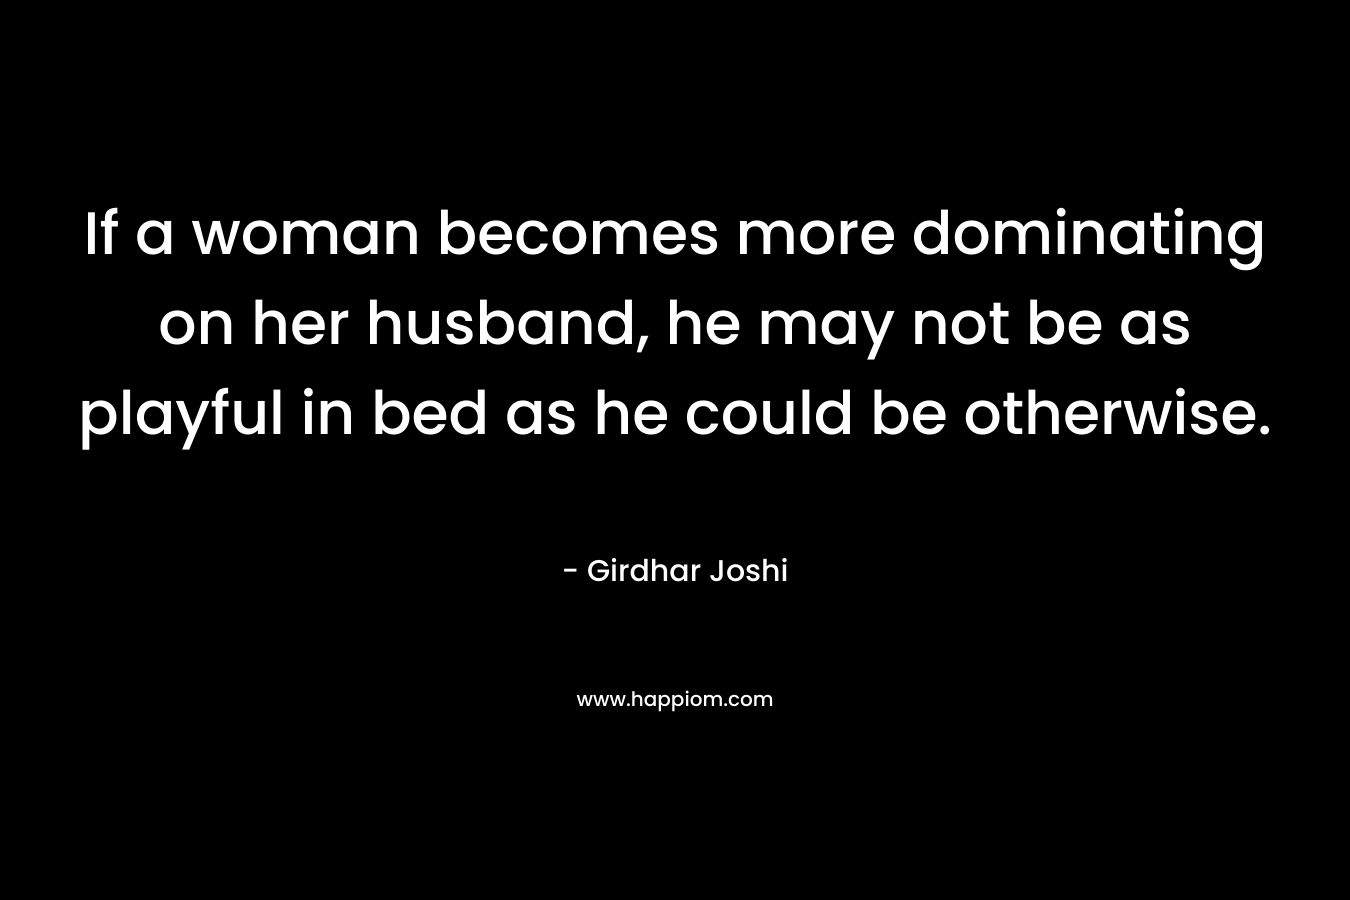 If a woman becomes more dominating on her husband, he may not be as playful in bed as he could be otherwise.